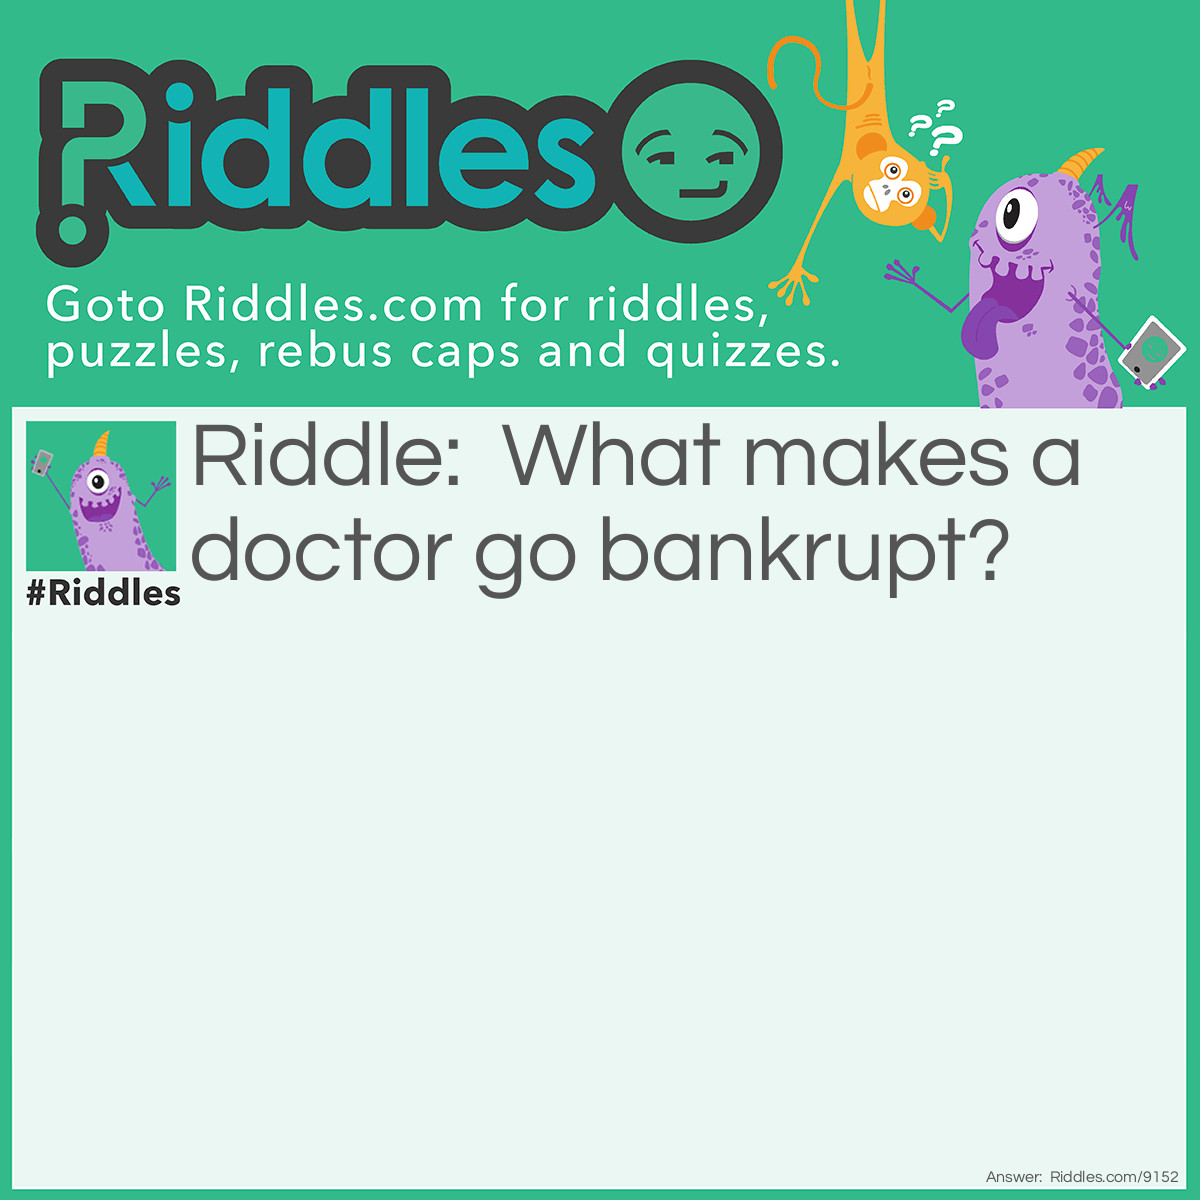 Riddle: What makes a doctor go bankrupt? Answer: An apple, an apple a day keeps the doctor away.